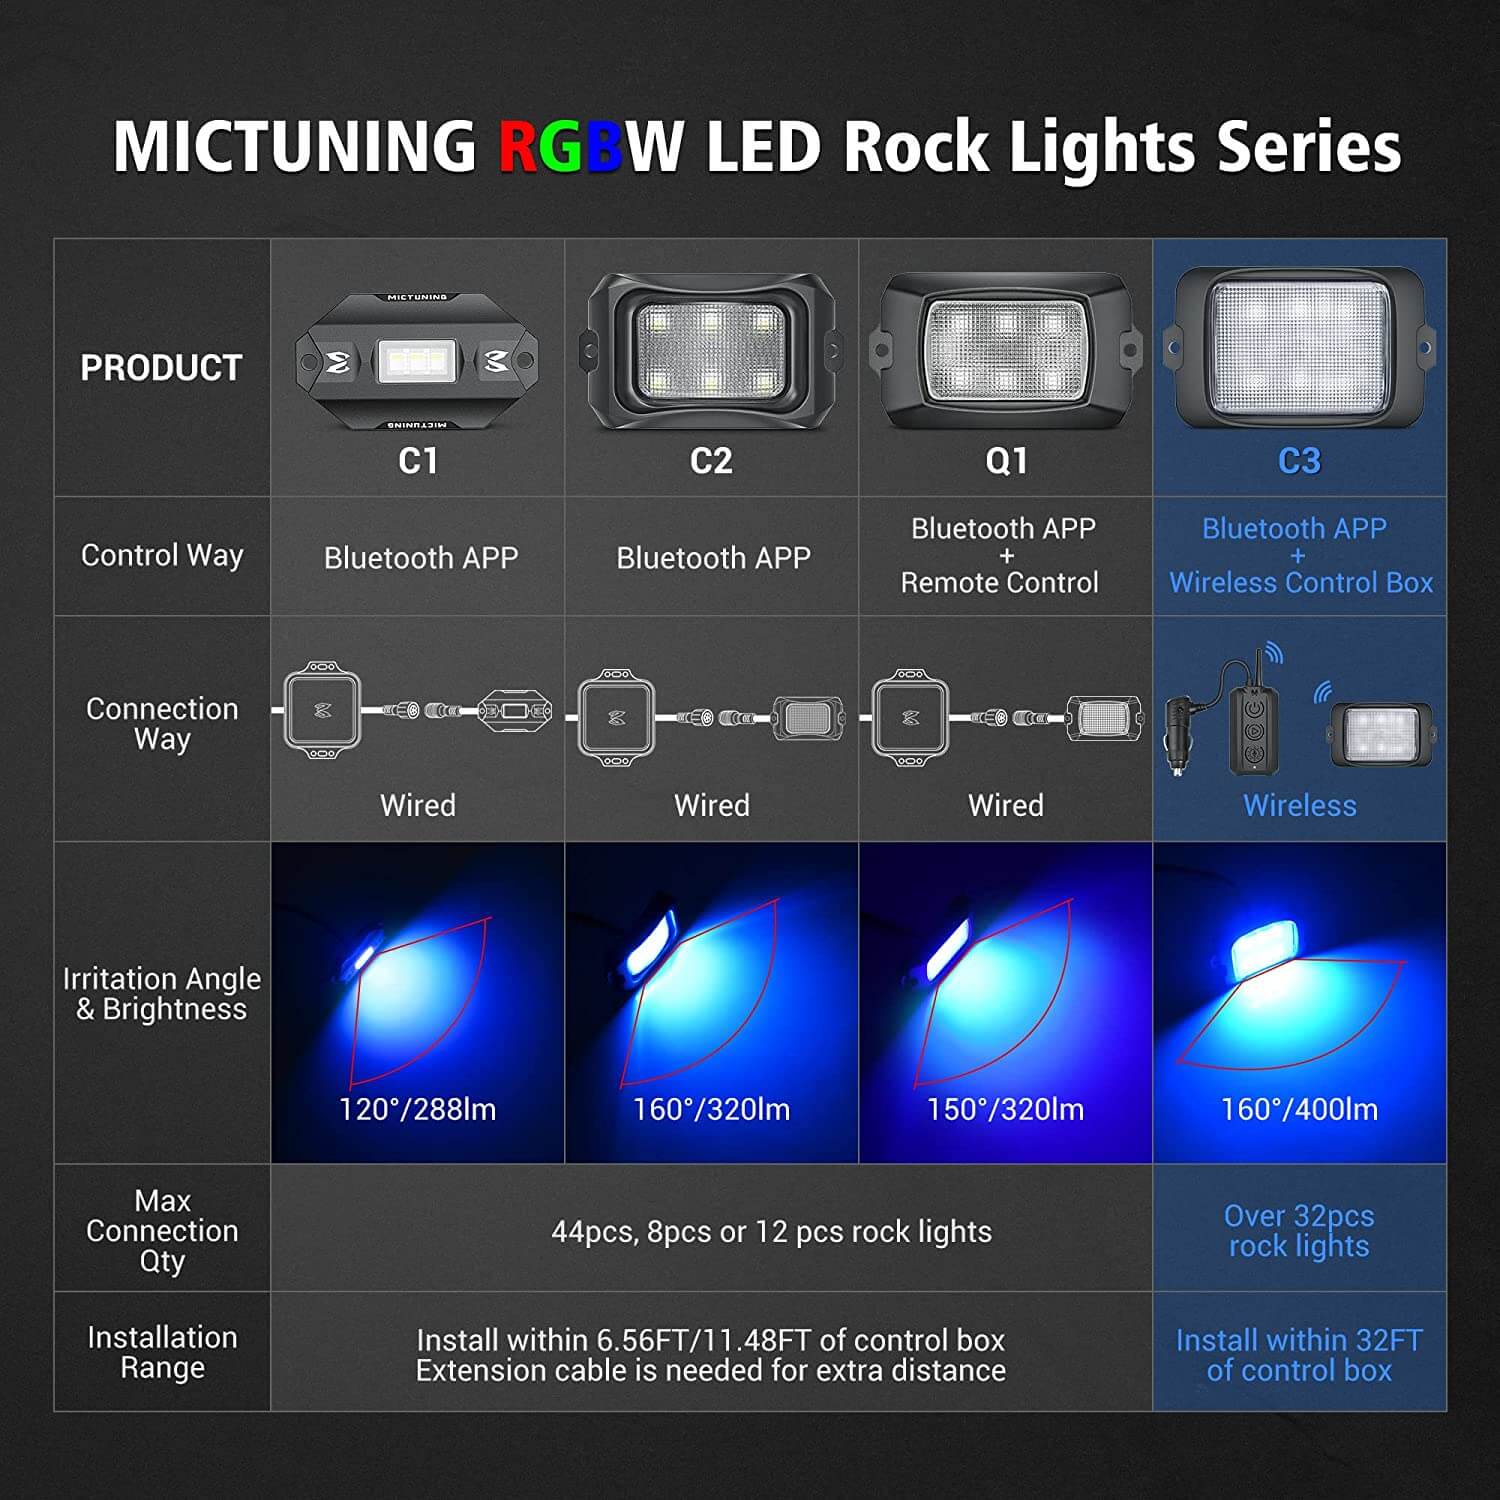 C3 Extensible RGBW LED Rock Lights - 20 Pods Wireless Control Multi-Color Neon Underglow Lights